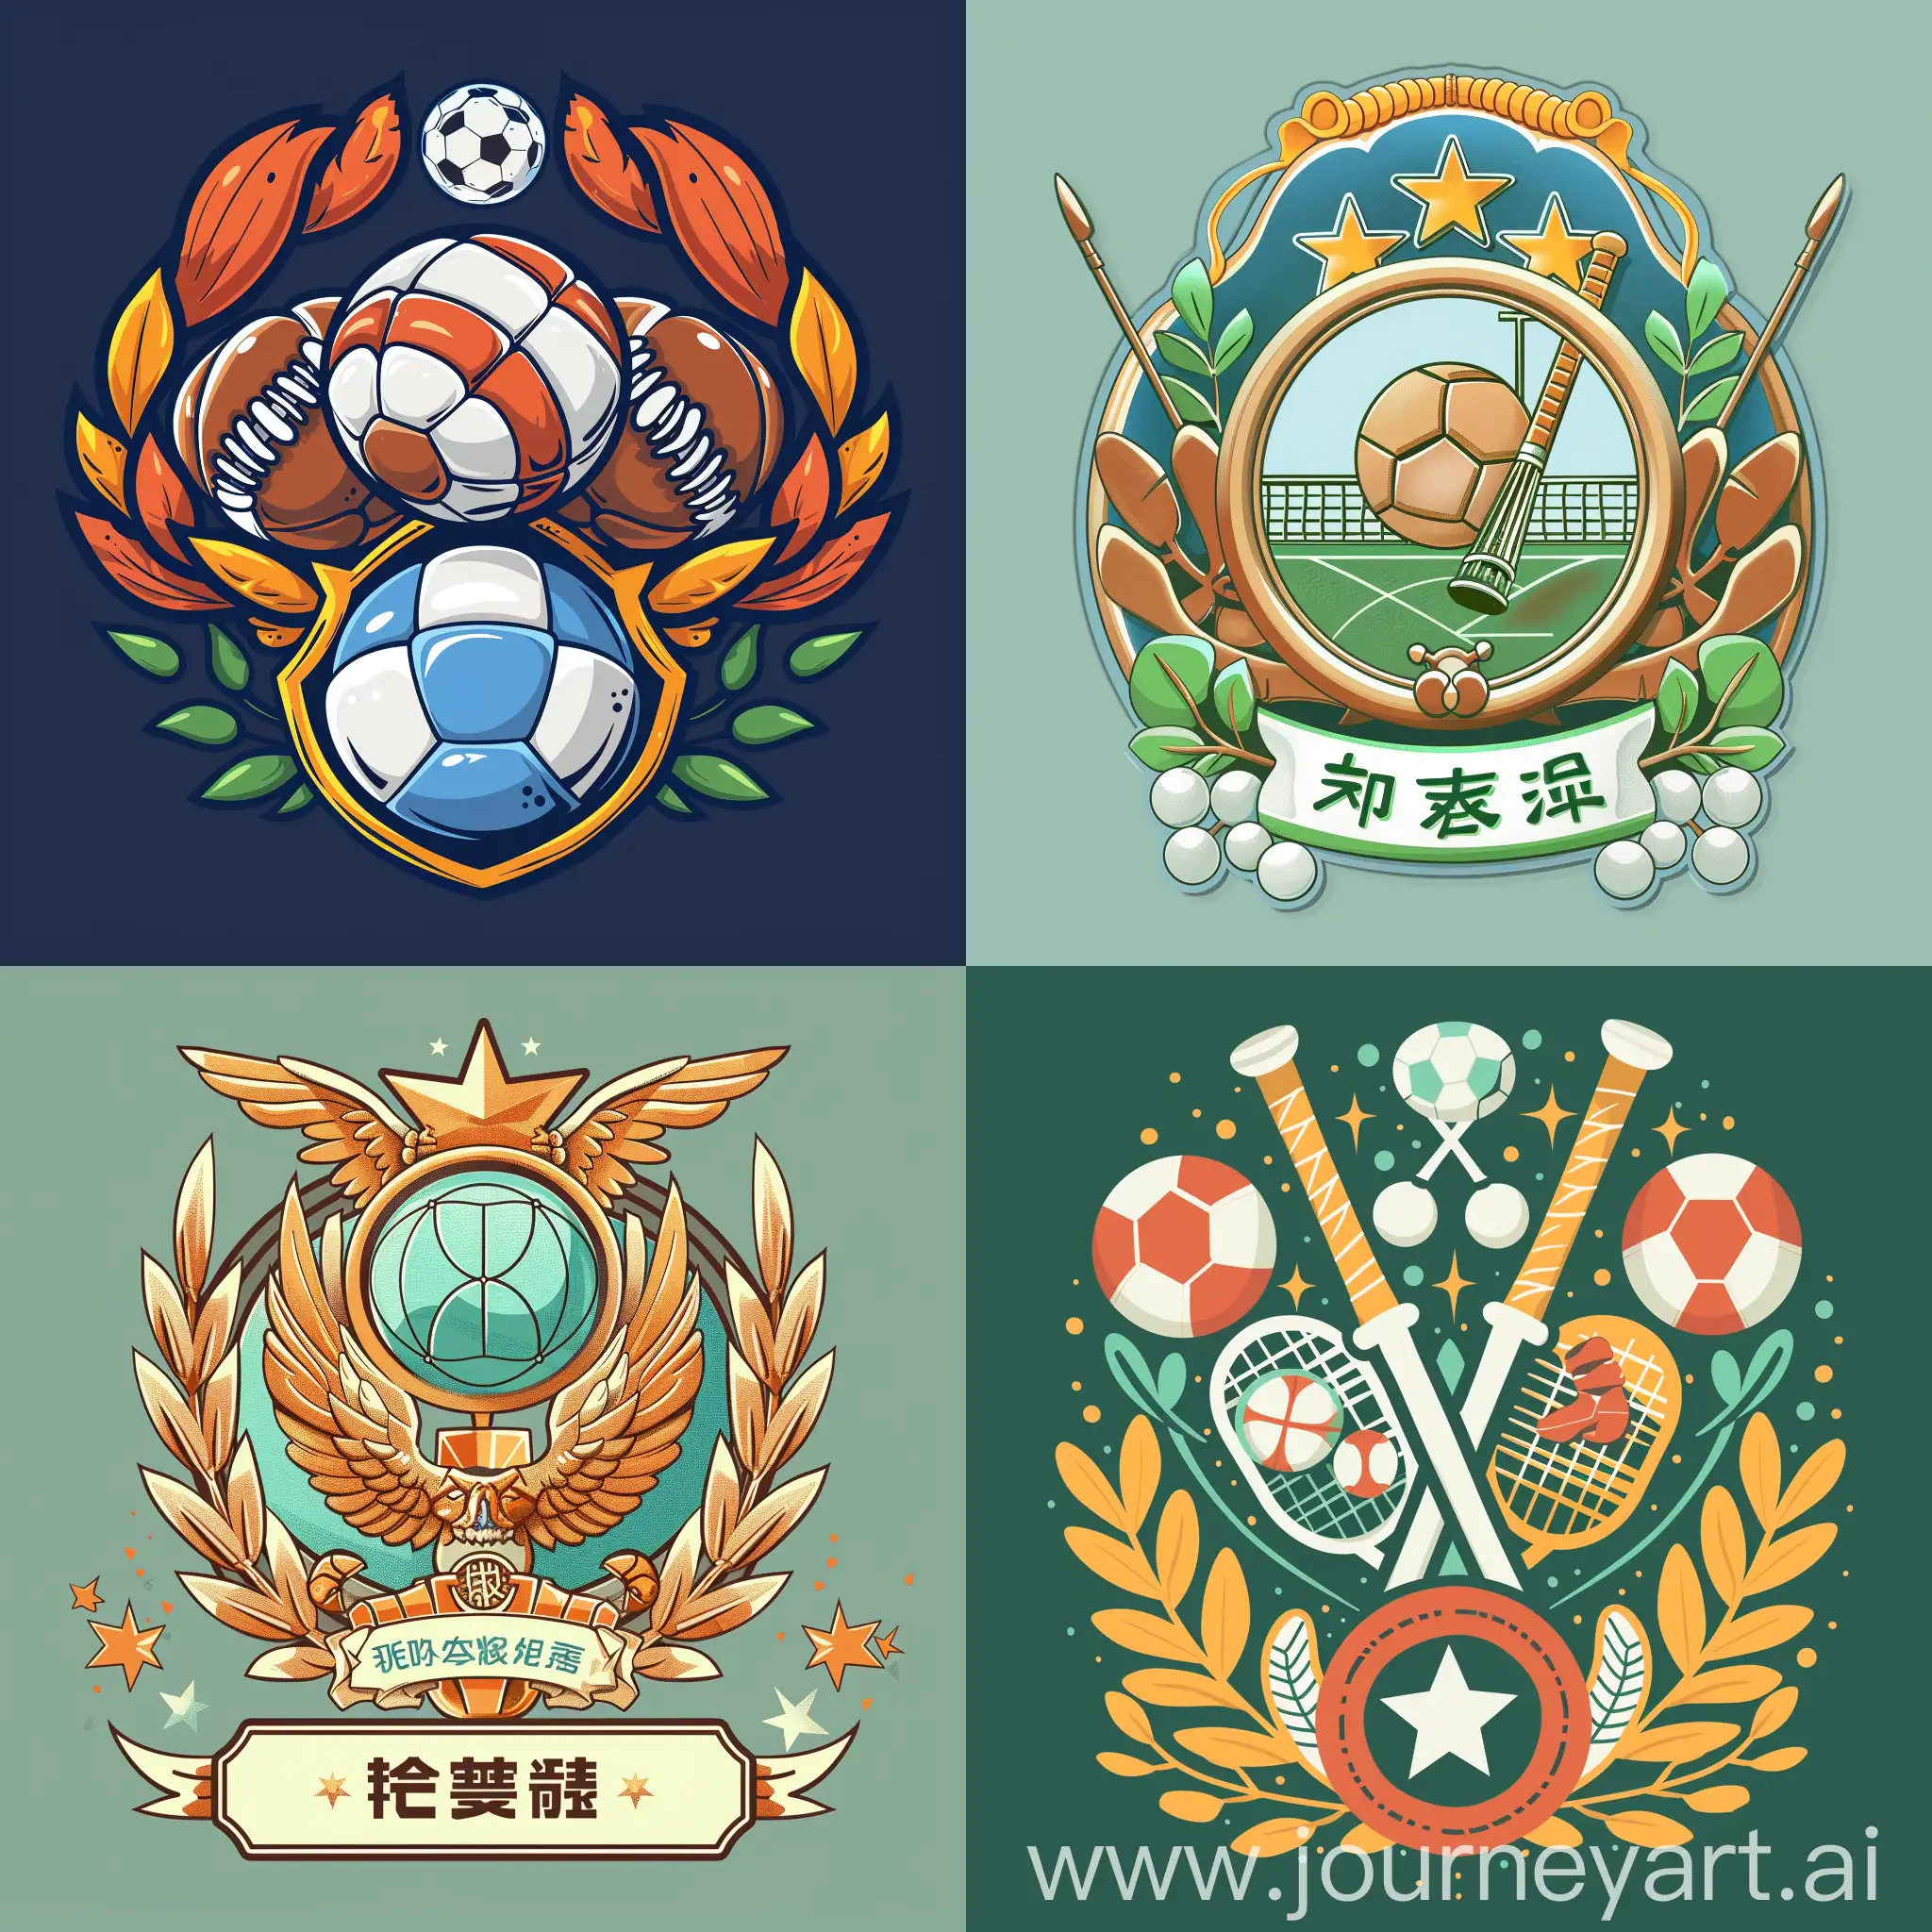 Elementary-School-Sports-Meeting-Badge-Dynamic-Youthful-and-Timeless